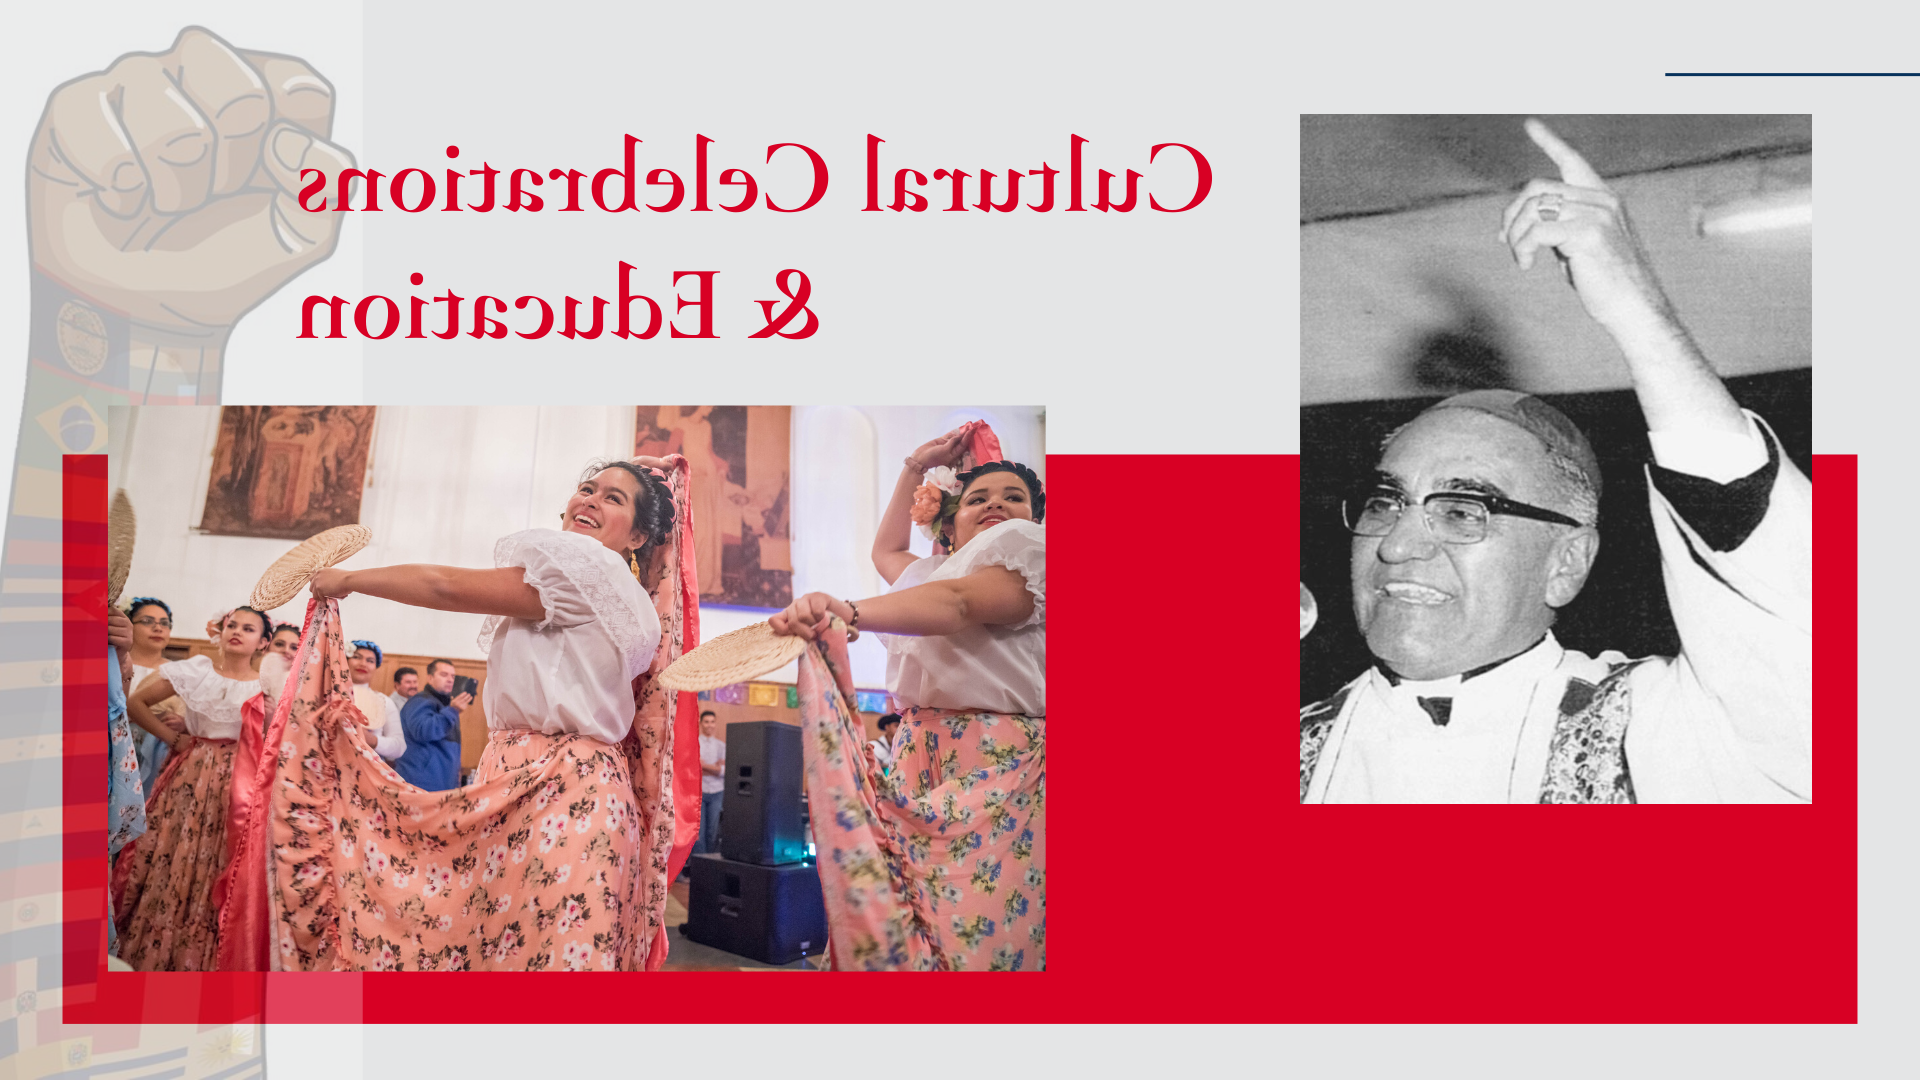 Red 和 grey banner with the words "Cultural Celebrations 和 Education" 和 an image of Oscar Romero 和 an image of dancers at a cultural celebration